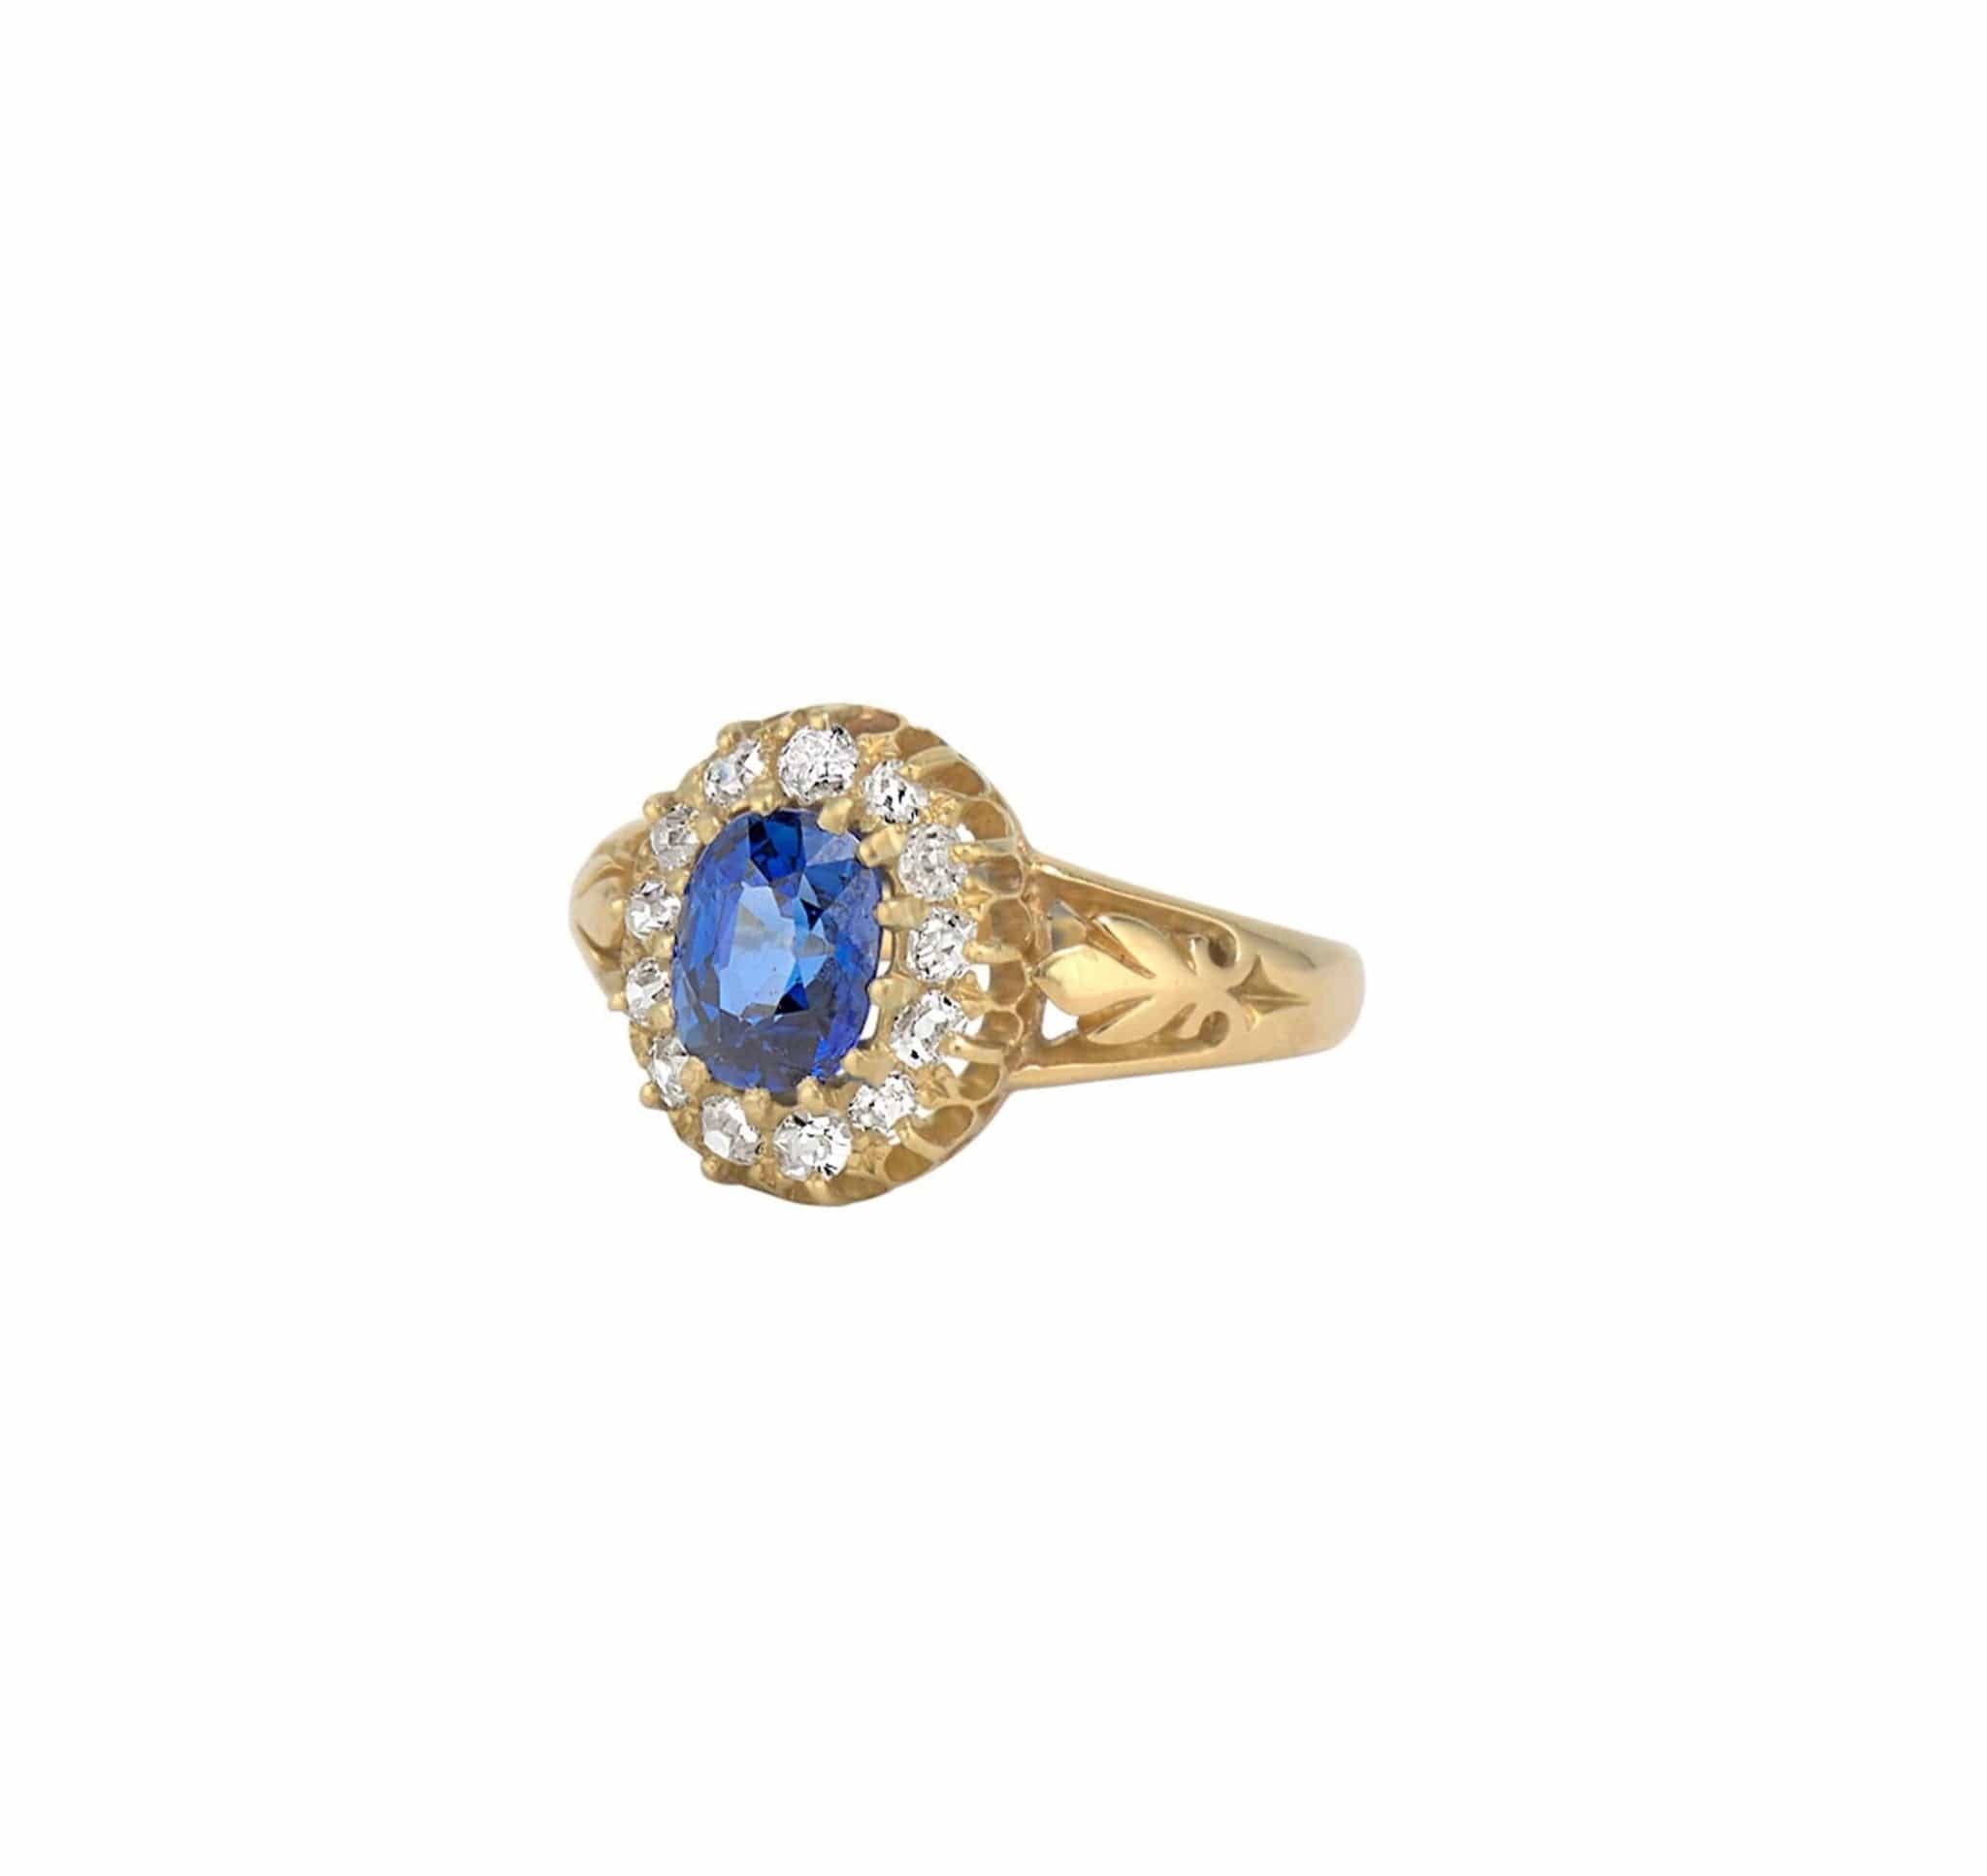 Antique Victorian Sapphire and Diamond Ring – Erstwhile Jewelry